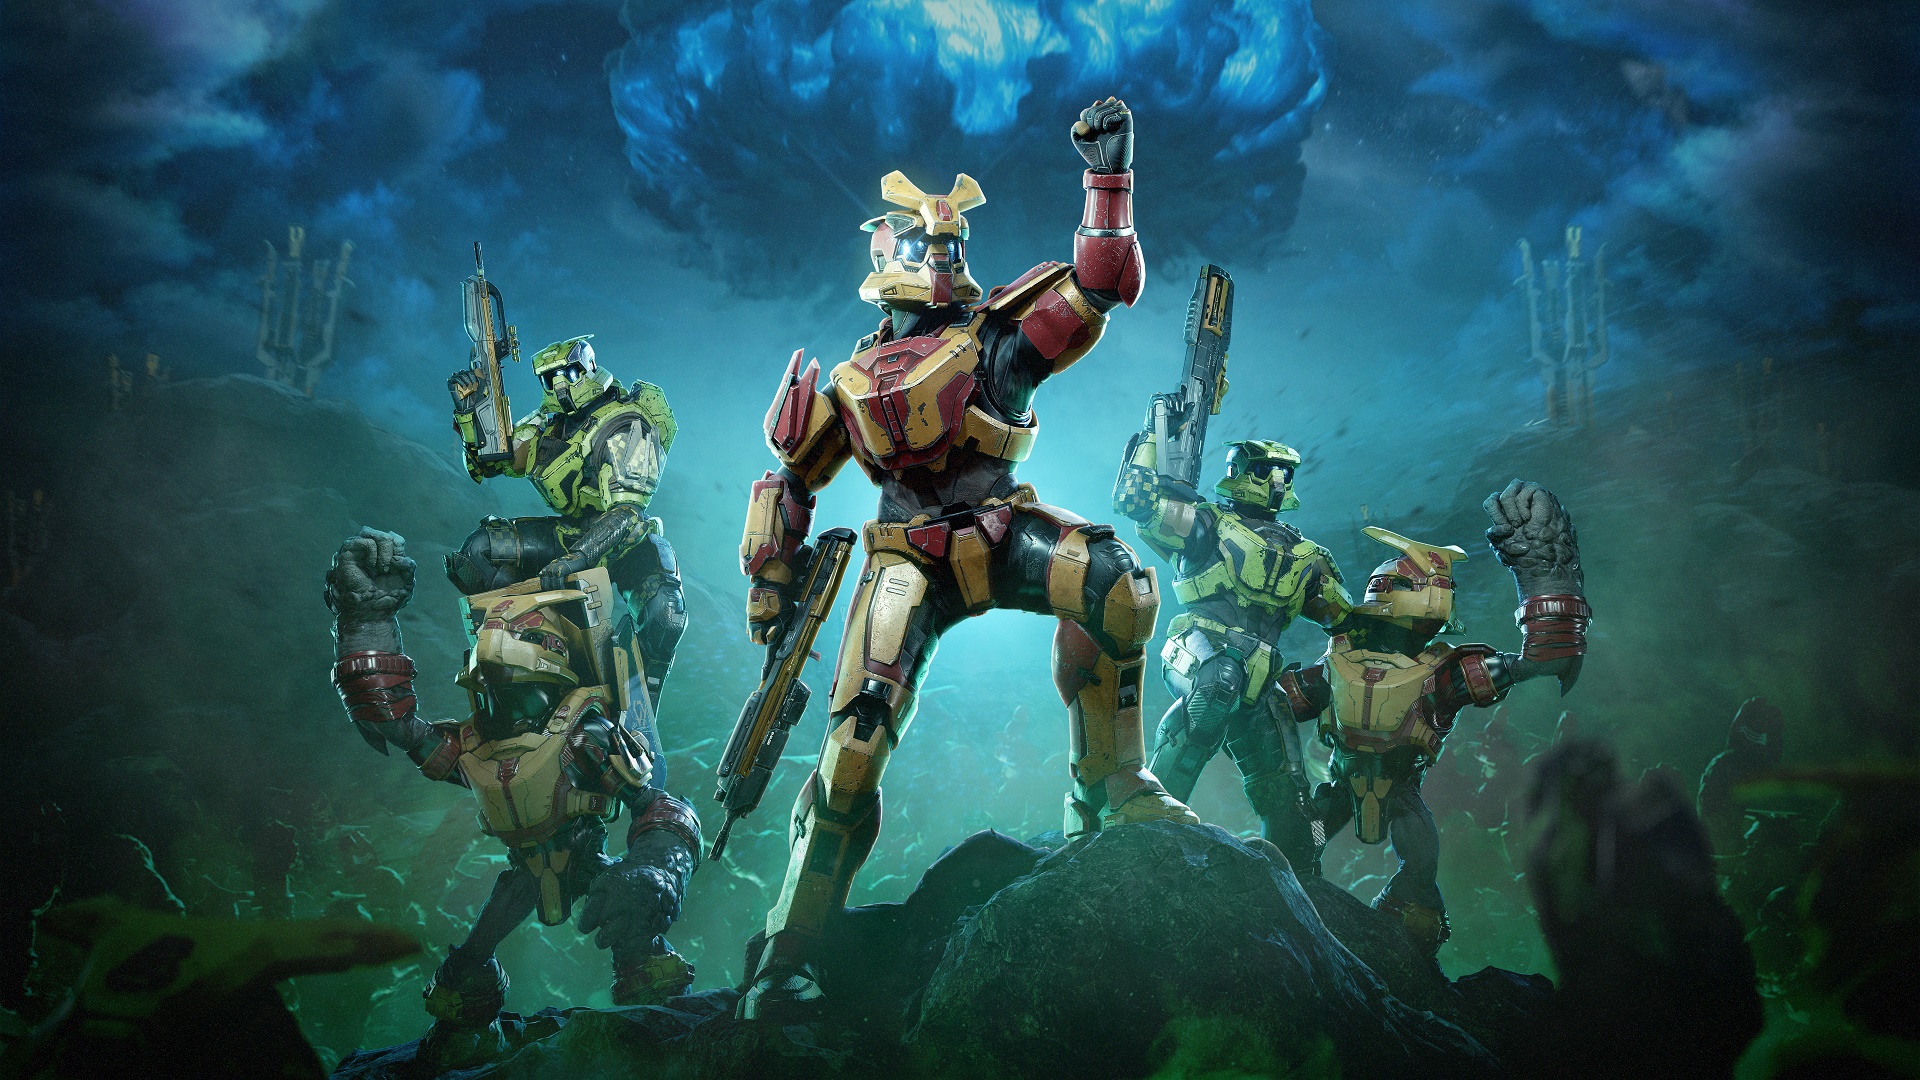 Halo Infinite key art for The Yappening II showing Spartans wearing new Operation customization rewards alongside Grunts and Glibnub's propaganda towers in a methane-rich environment